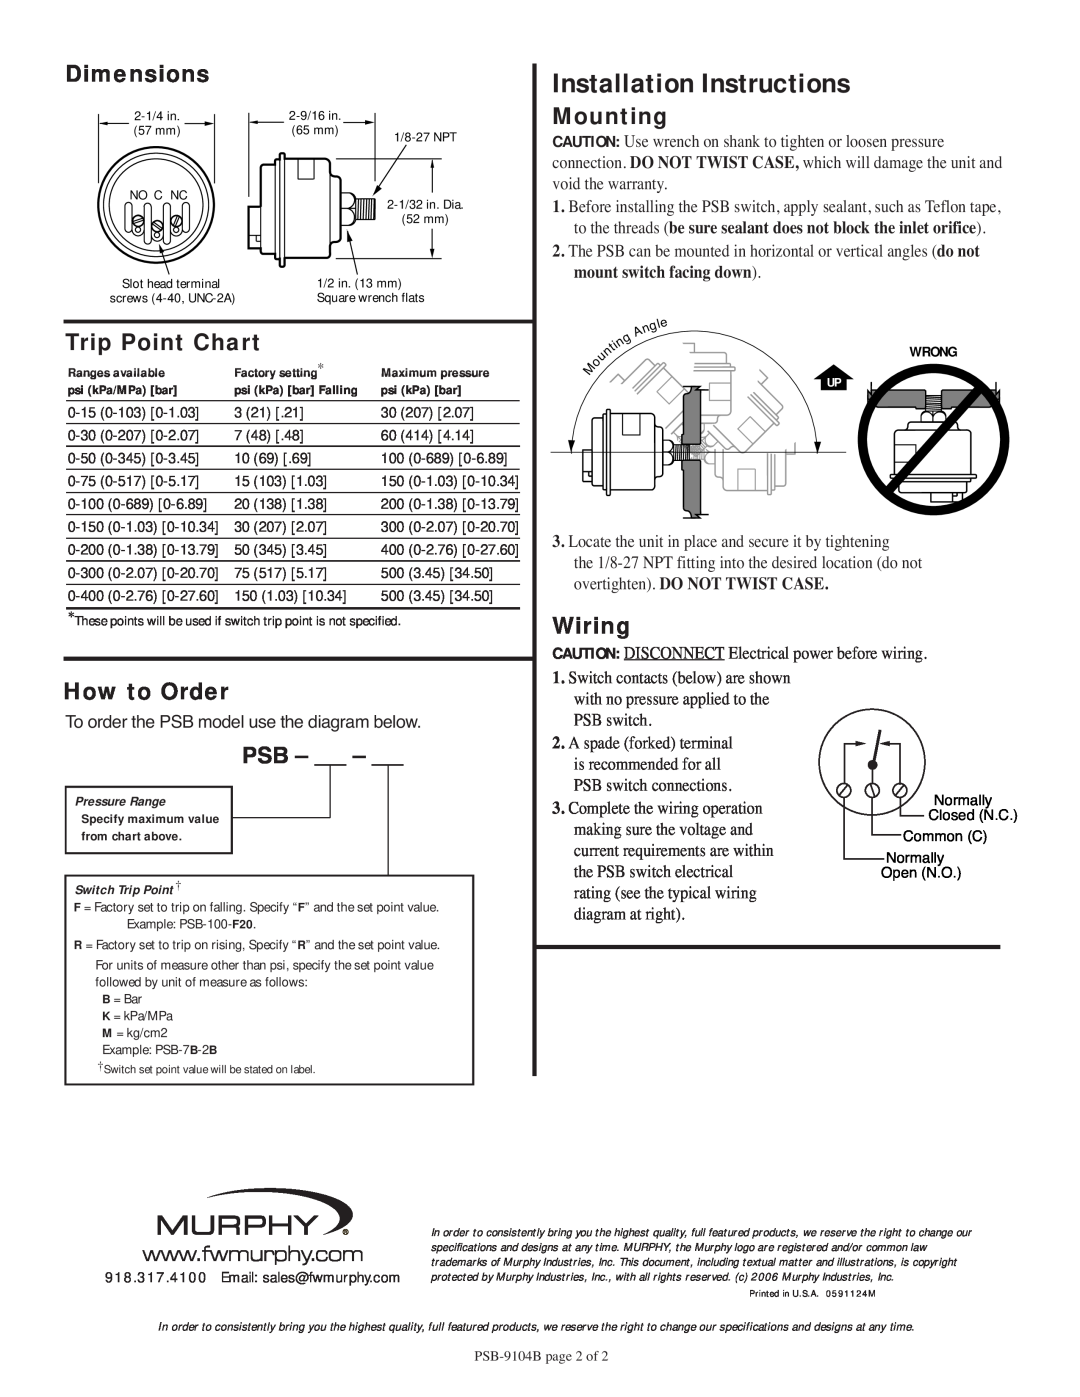 Murphy PSB specifications Dimensions, Mounting, Trip Point Chart, Wiring, How to Order, Installation Instructions 